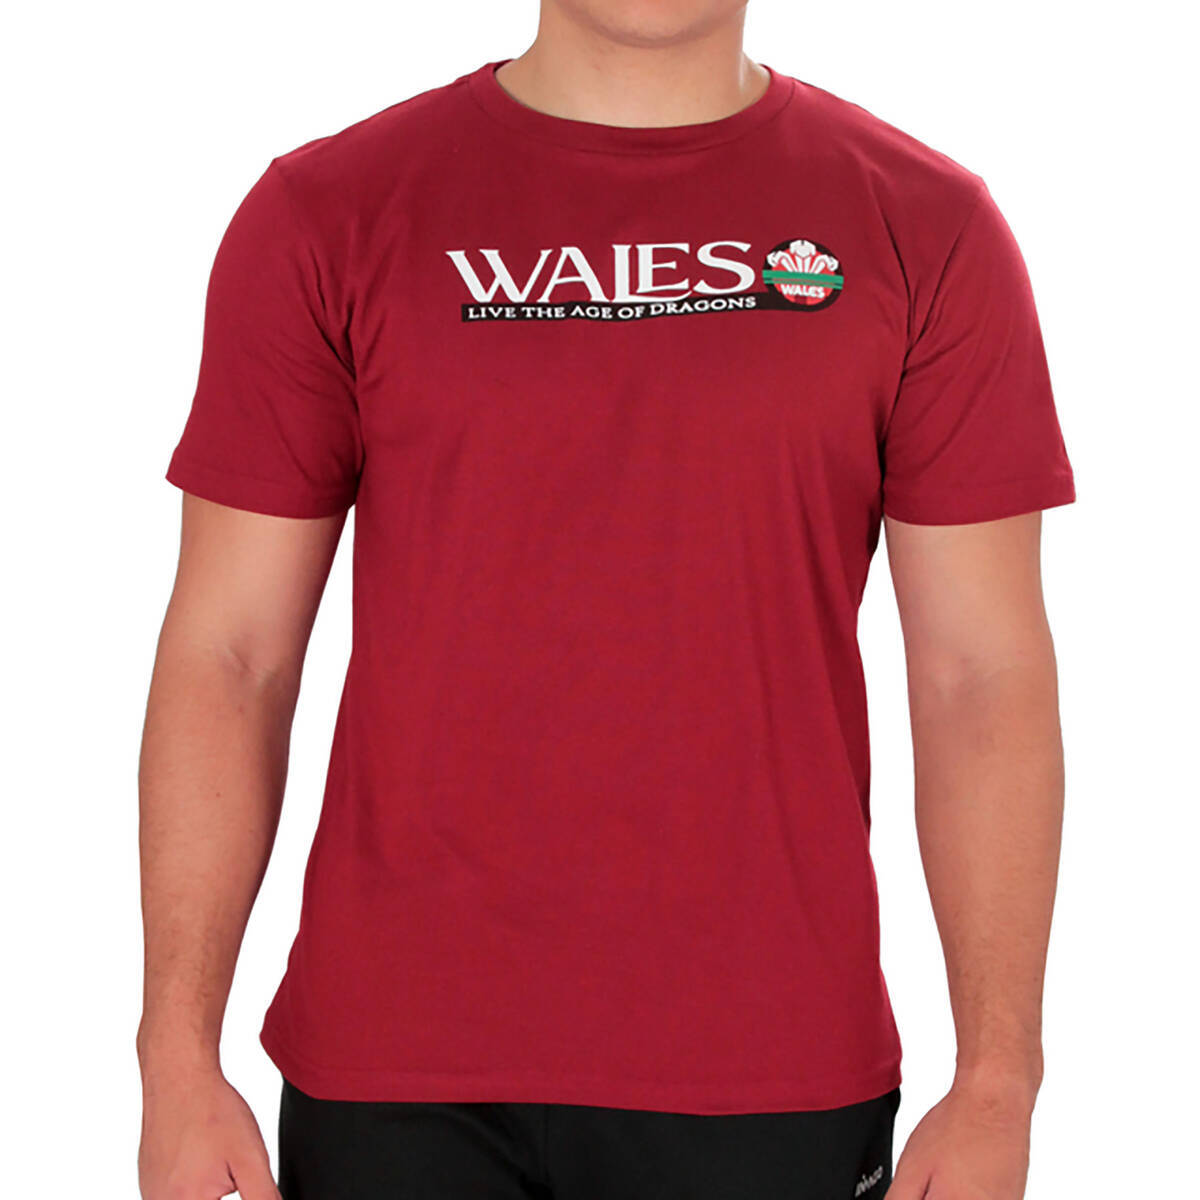 Imagen producto Remera Wales Live the Ages of Dragons 14